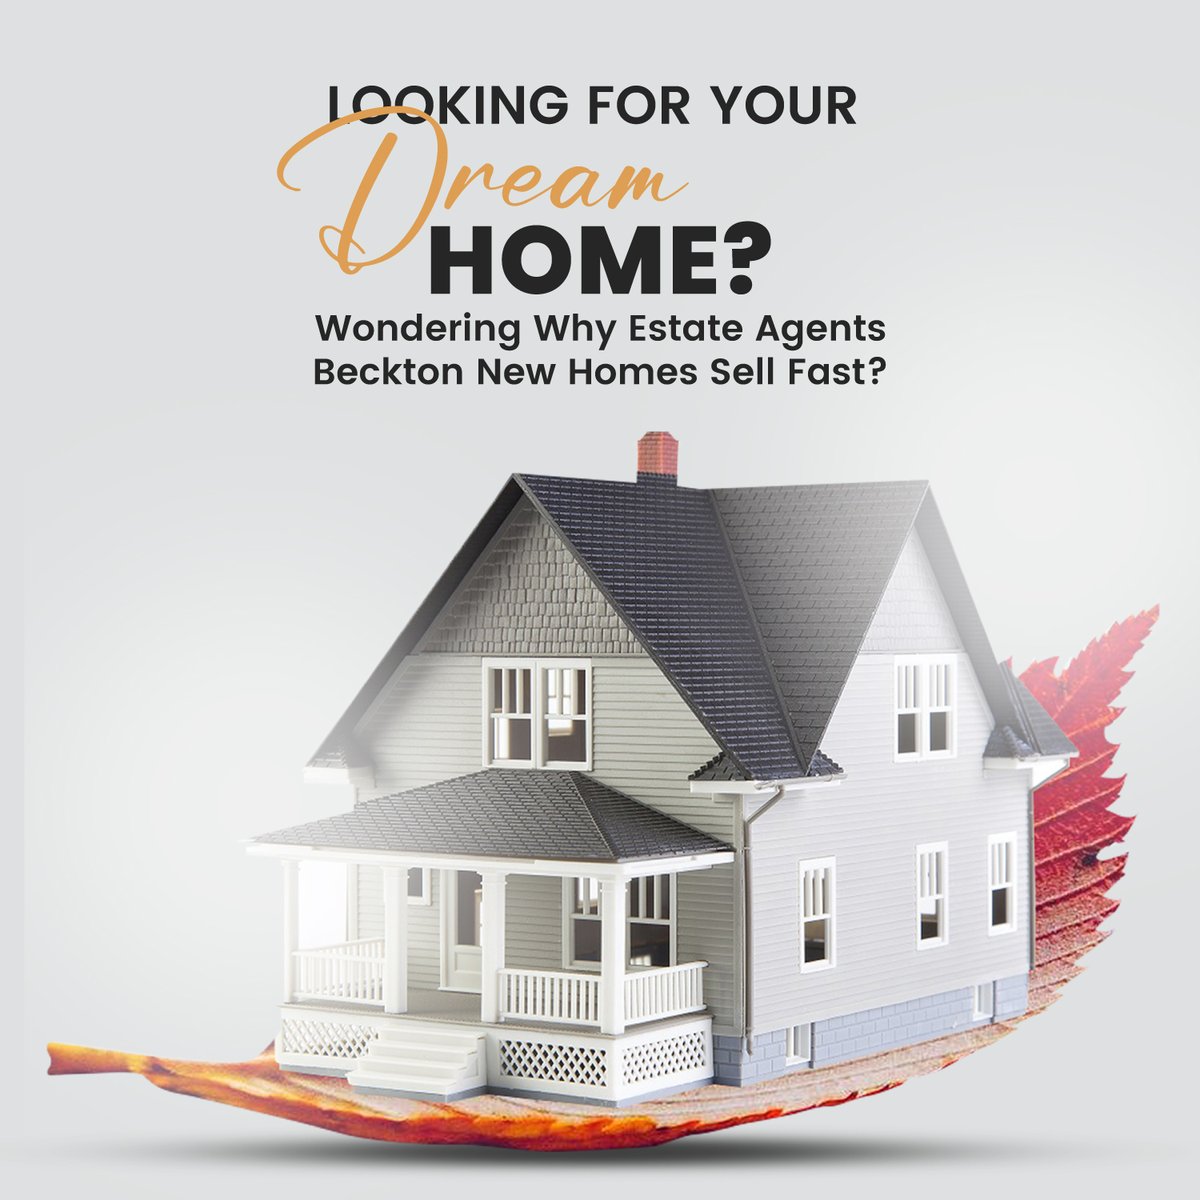 🏡 Searching for your dream home in Beckton, London? 🌟 Discover why new homes here are in high demand! 

#BecktonRealEstate #DreamHome #FastSellingHomes #LondonLiving #EstateAgentsBeckton